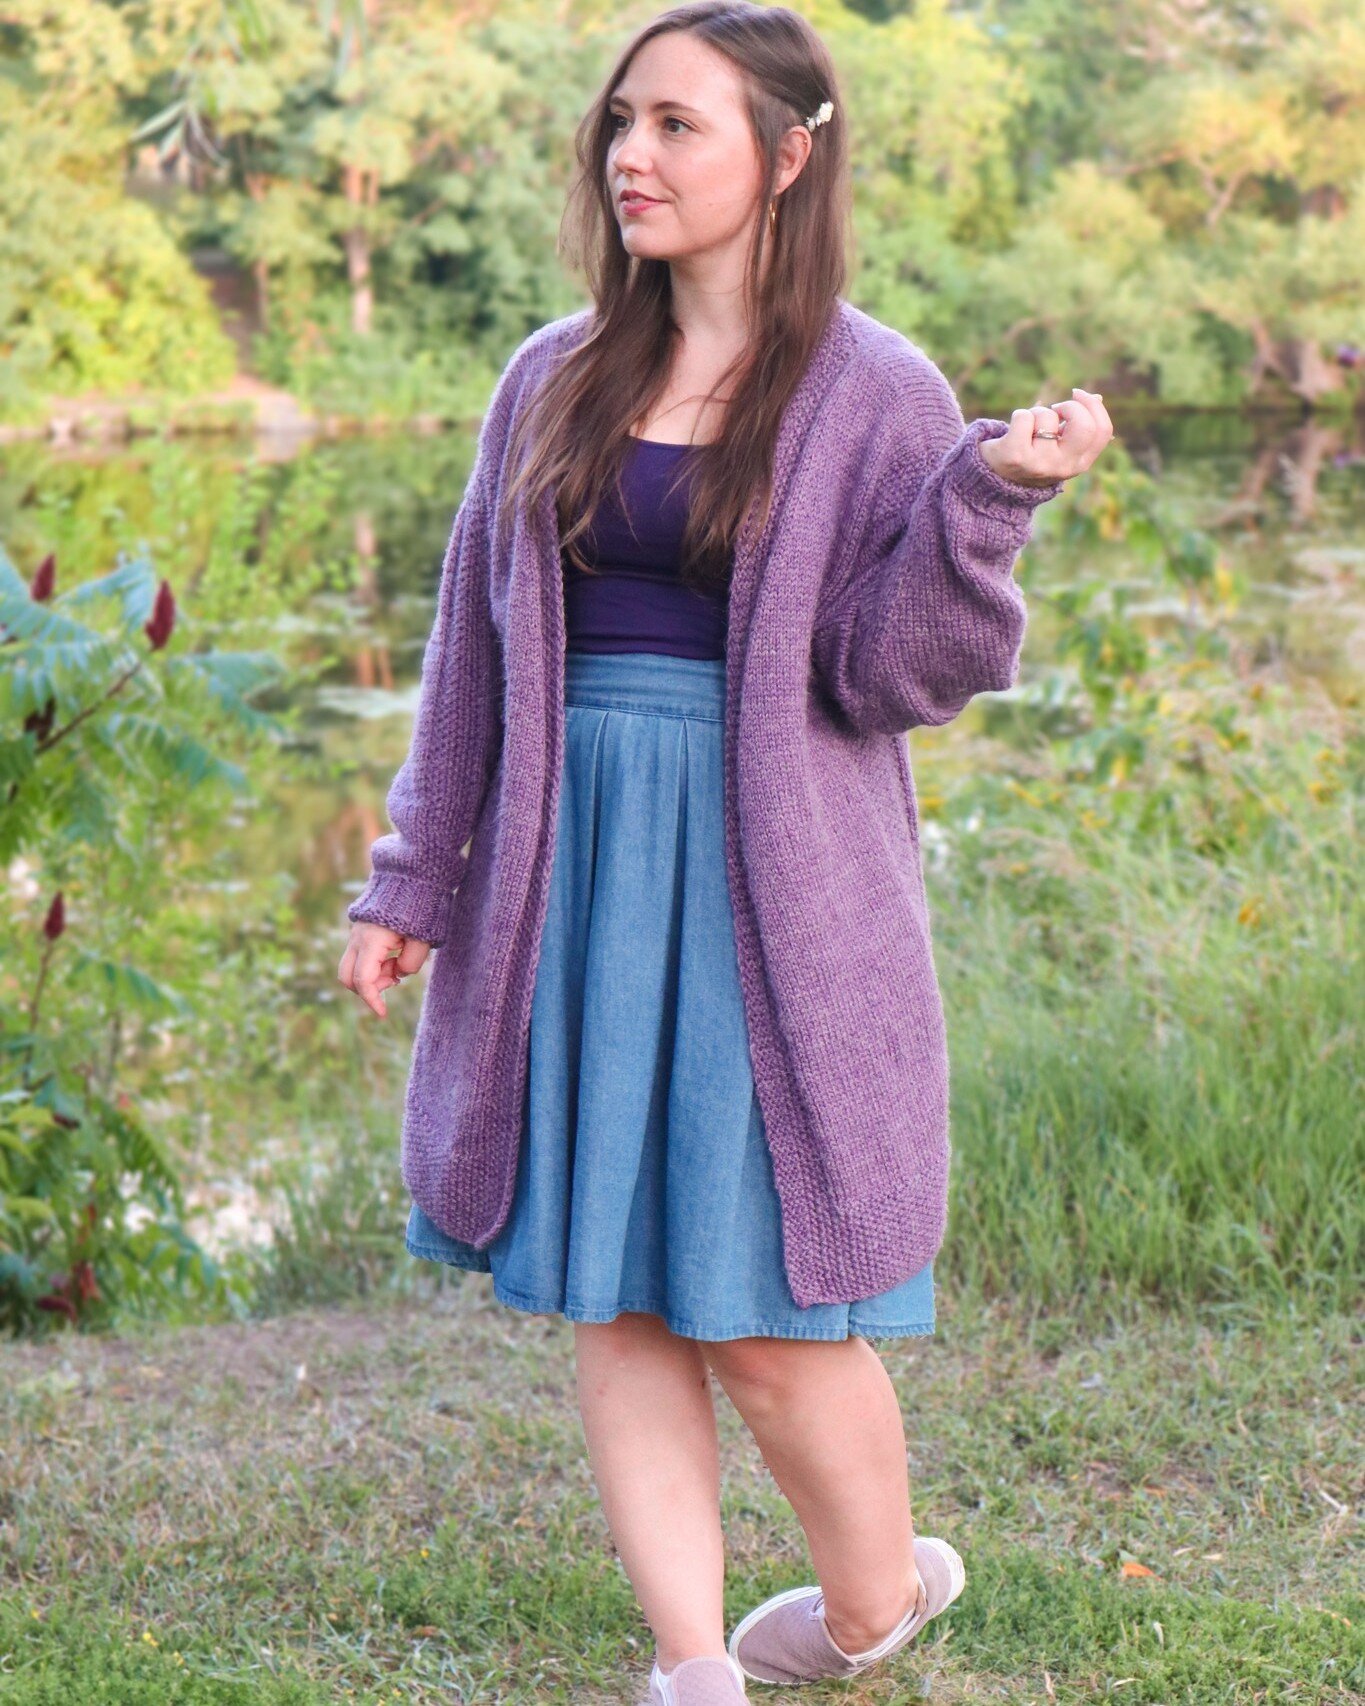 Cozy Cardigan TIME! February is the coldest month around these parts, and that's when I break out my warmest cardigans. The Sewing Seeds Cardigan is definitely cozy like no other. 

Check out the detail in this! I love it!
---------------------------